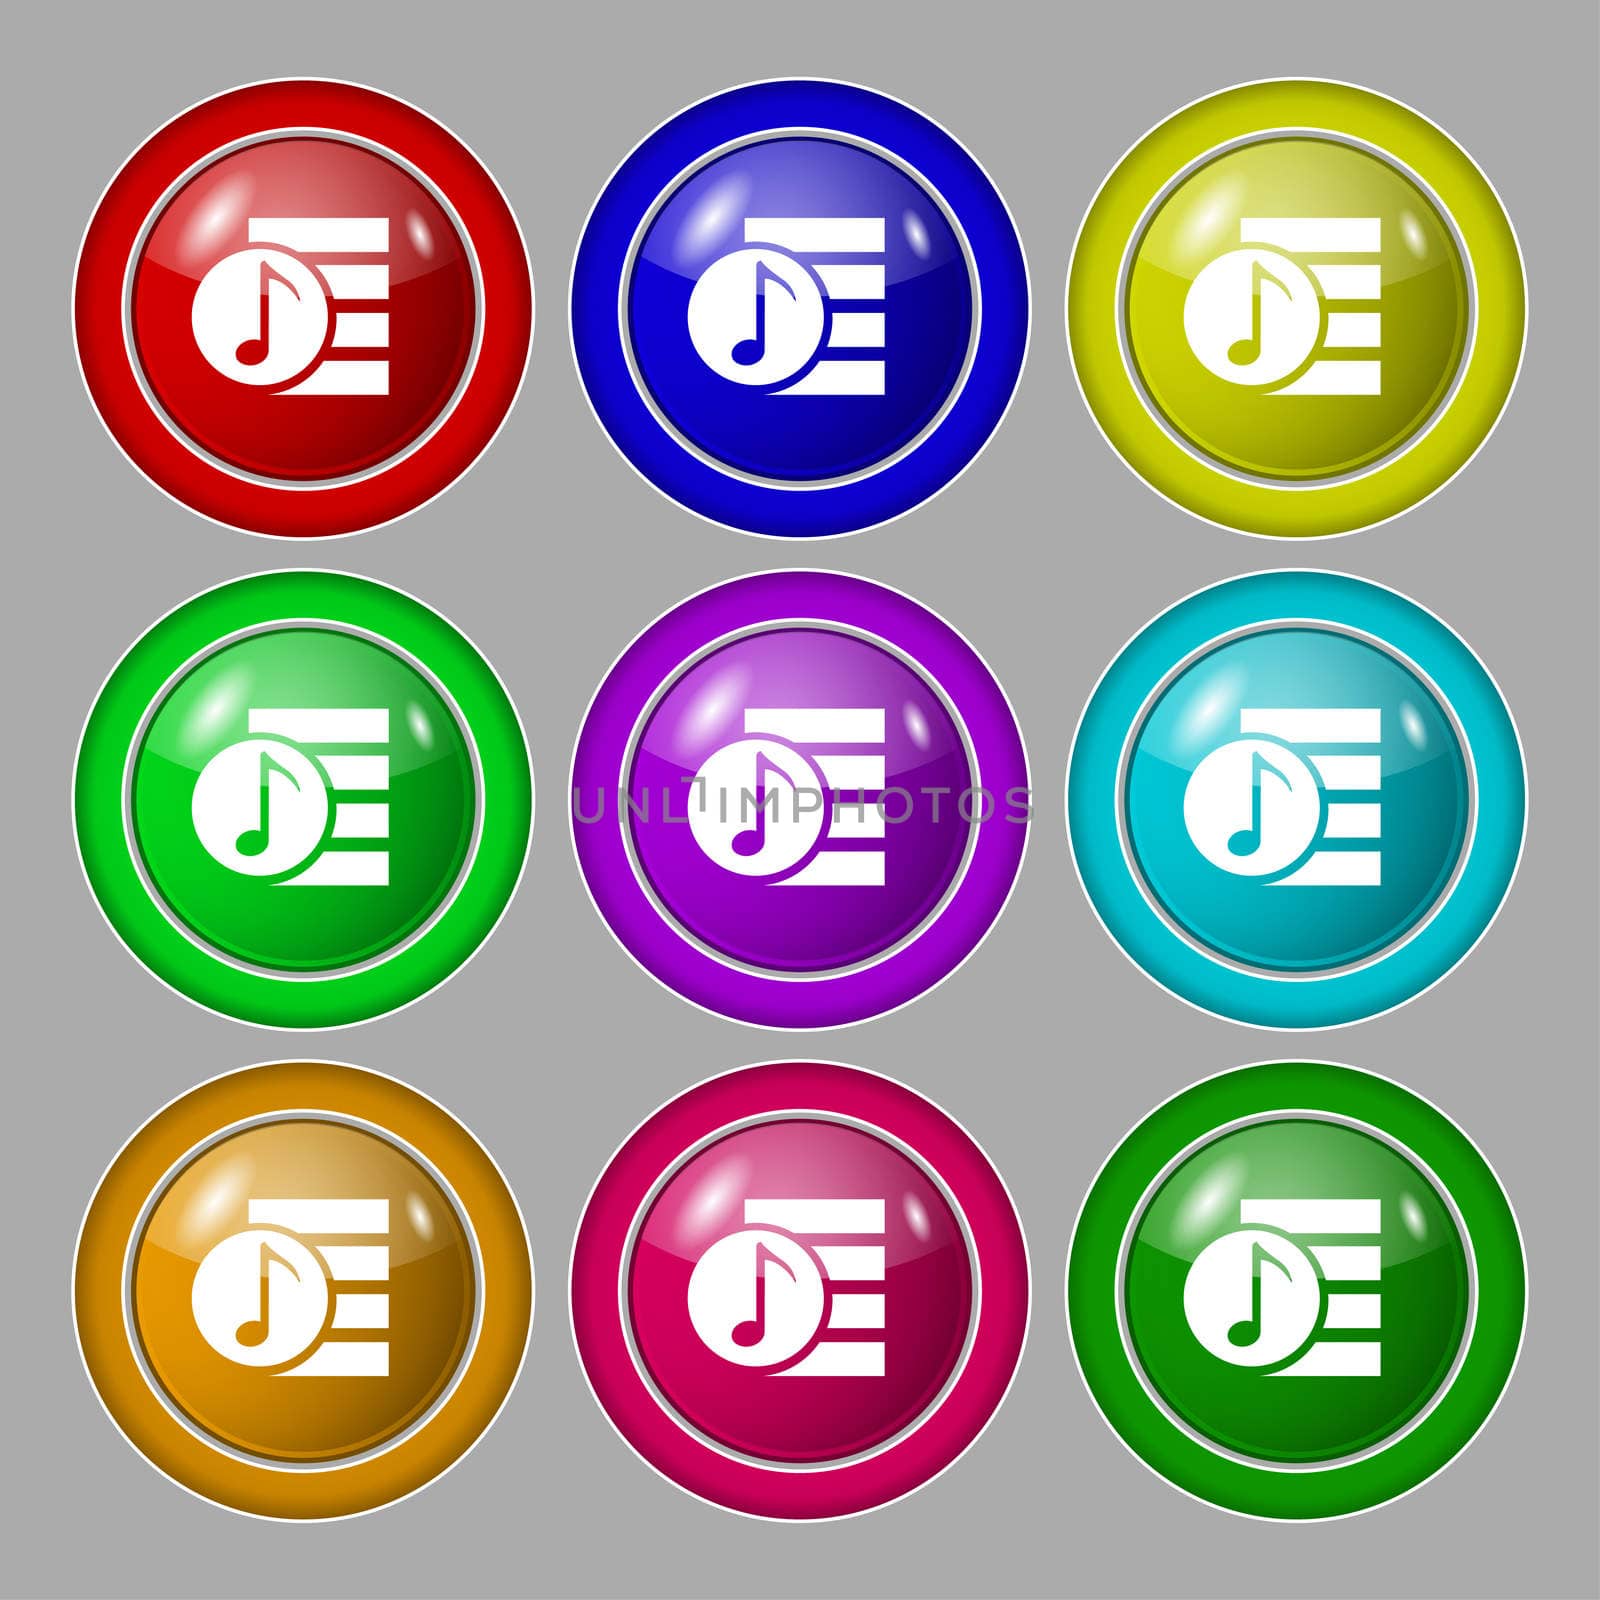 Audio, MP3 file icon sign. symbol on nine round colourful buttons. illustration